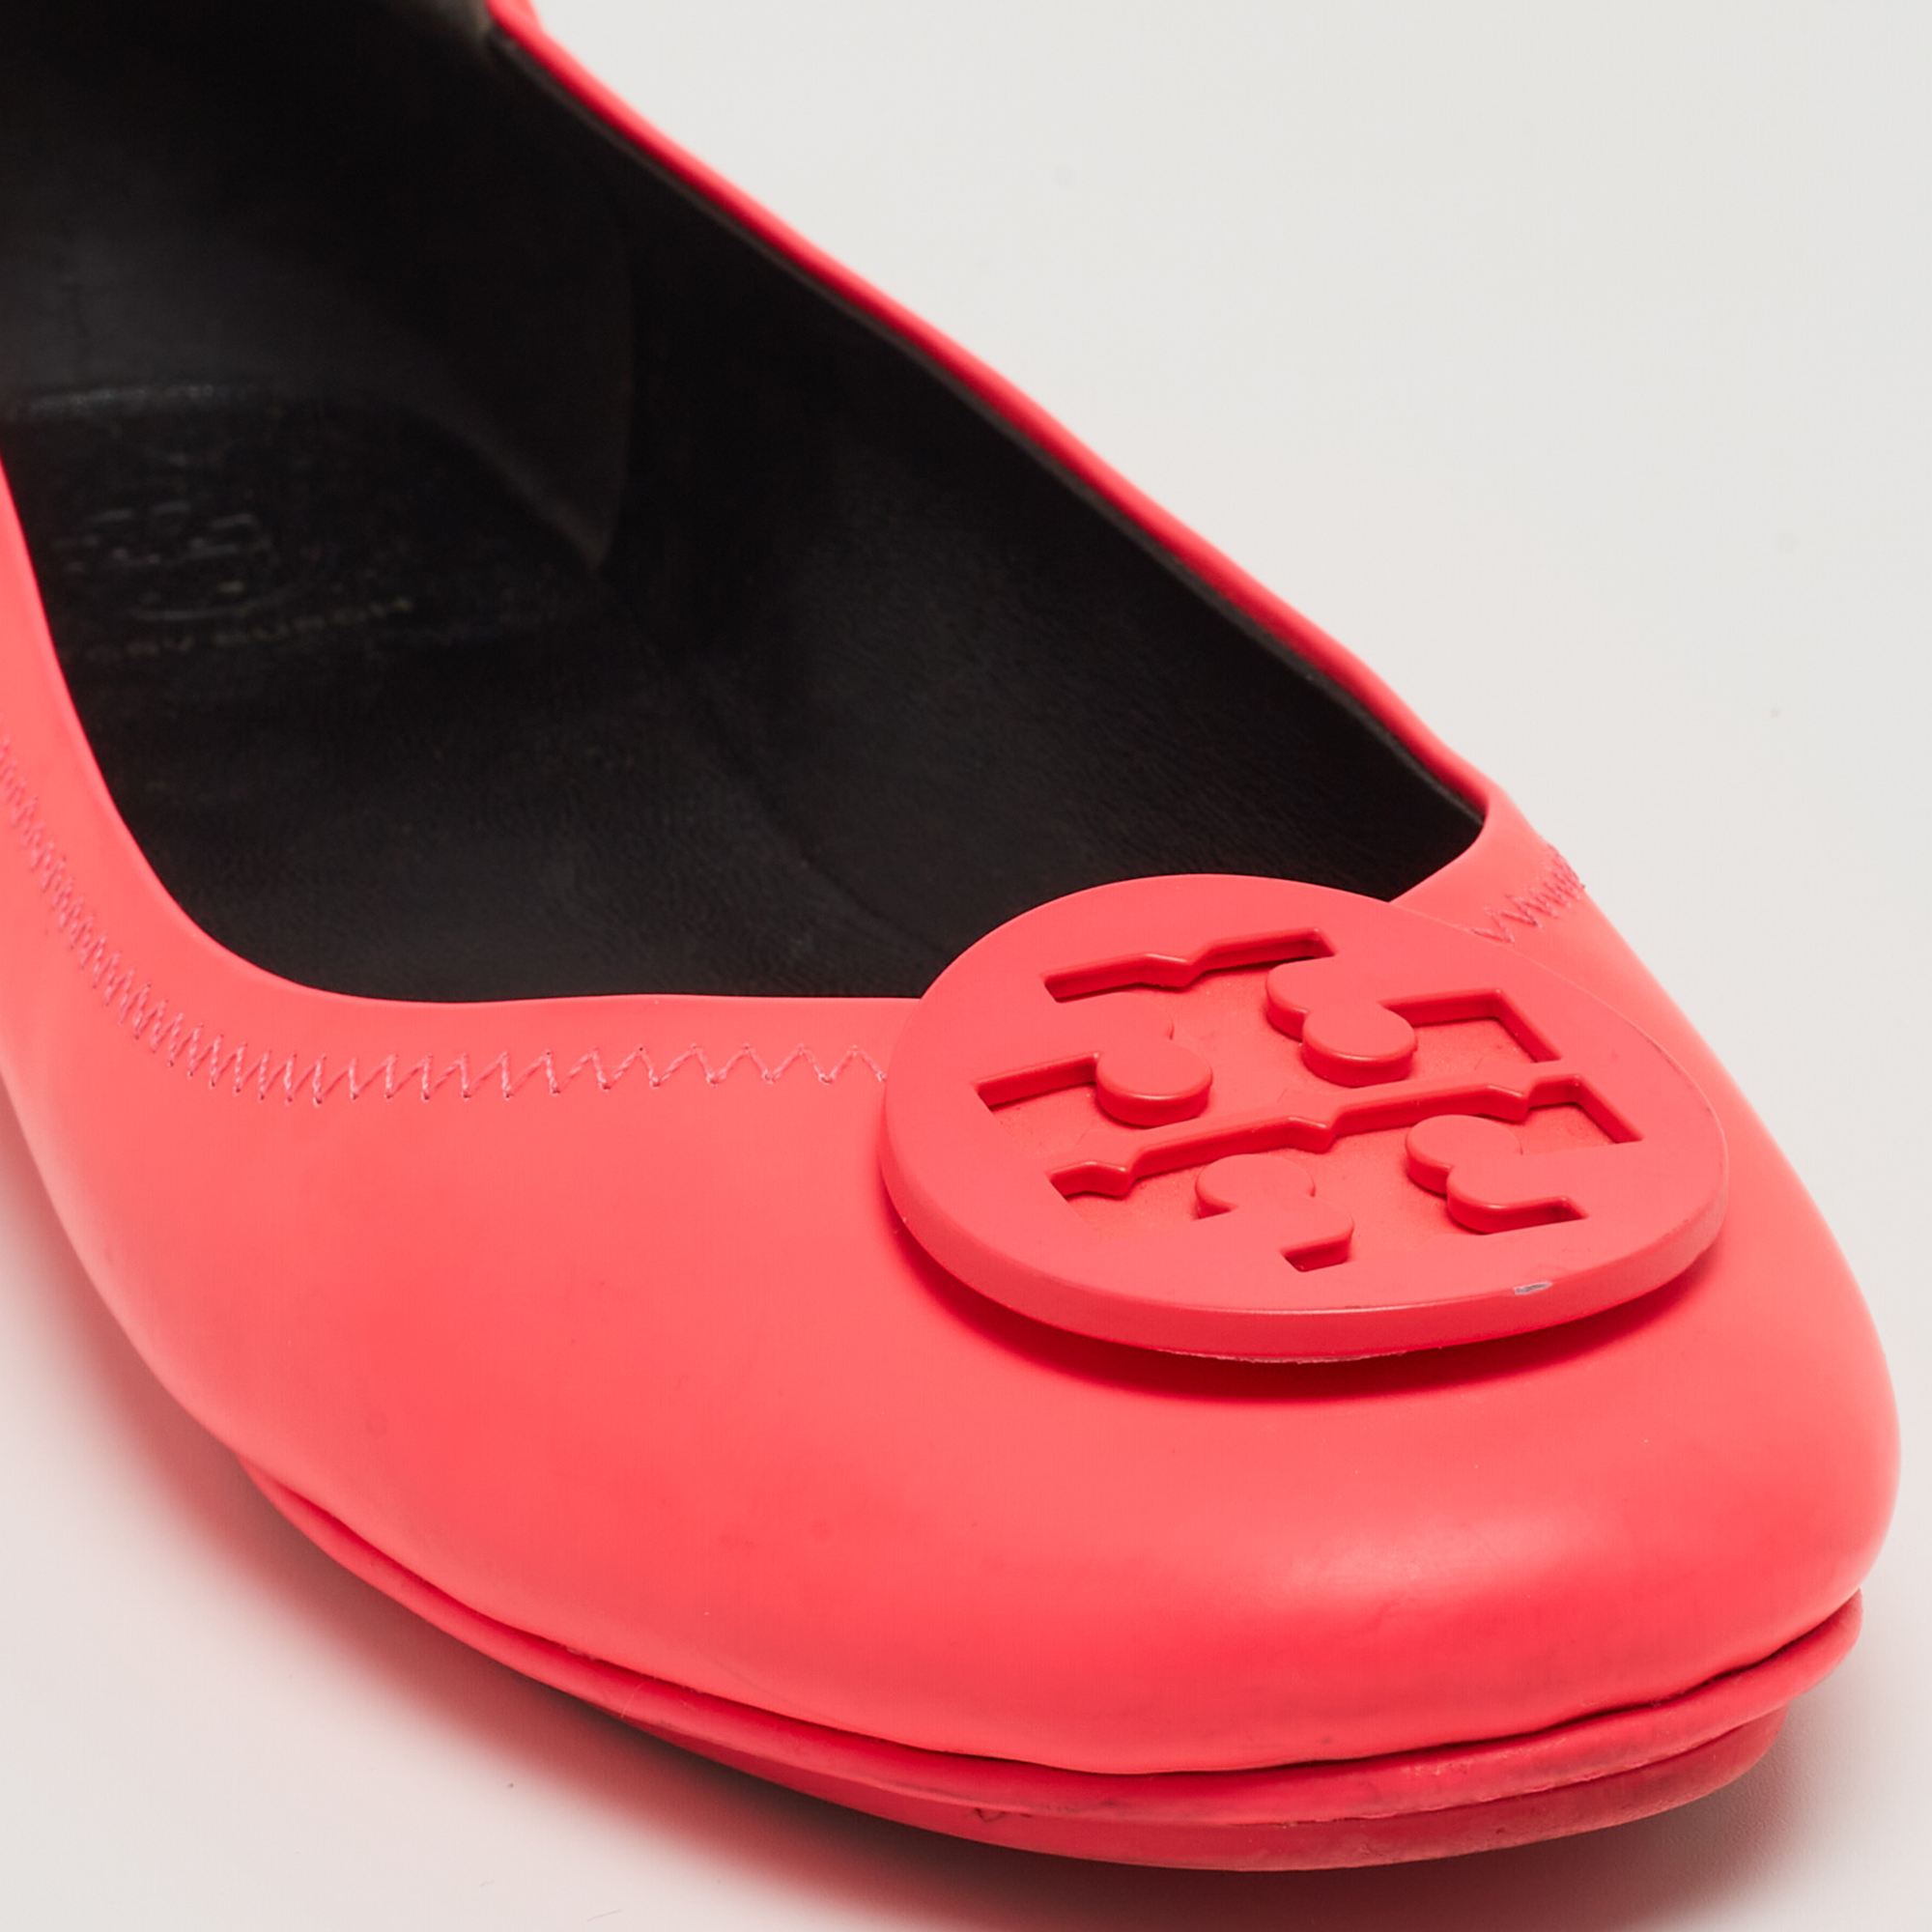 Tory Burch Neon Pink Leather Reva Ballet Flats Size 40.5